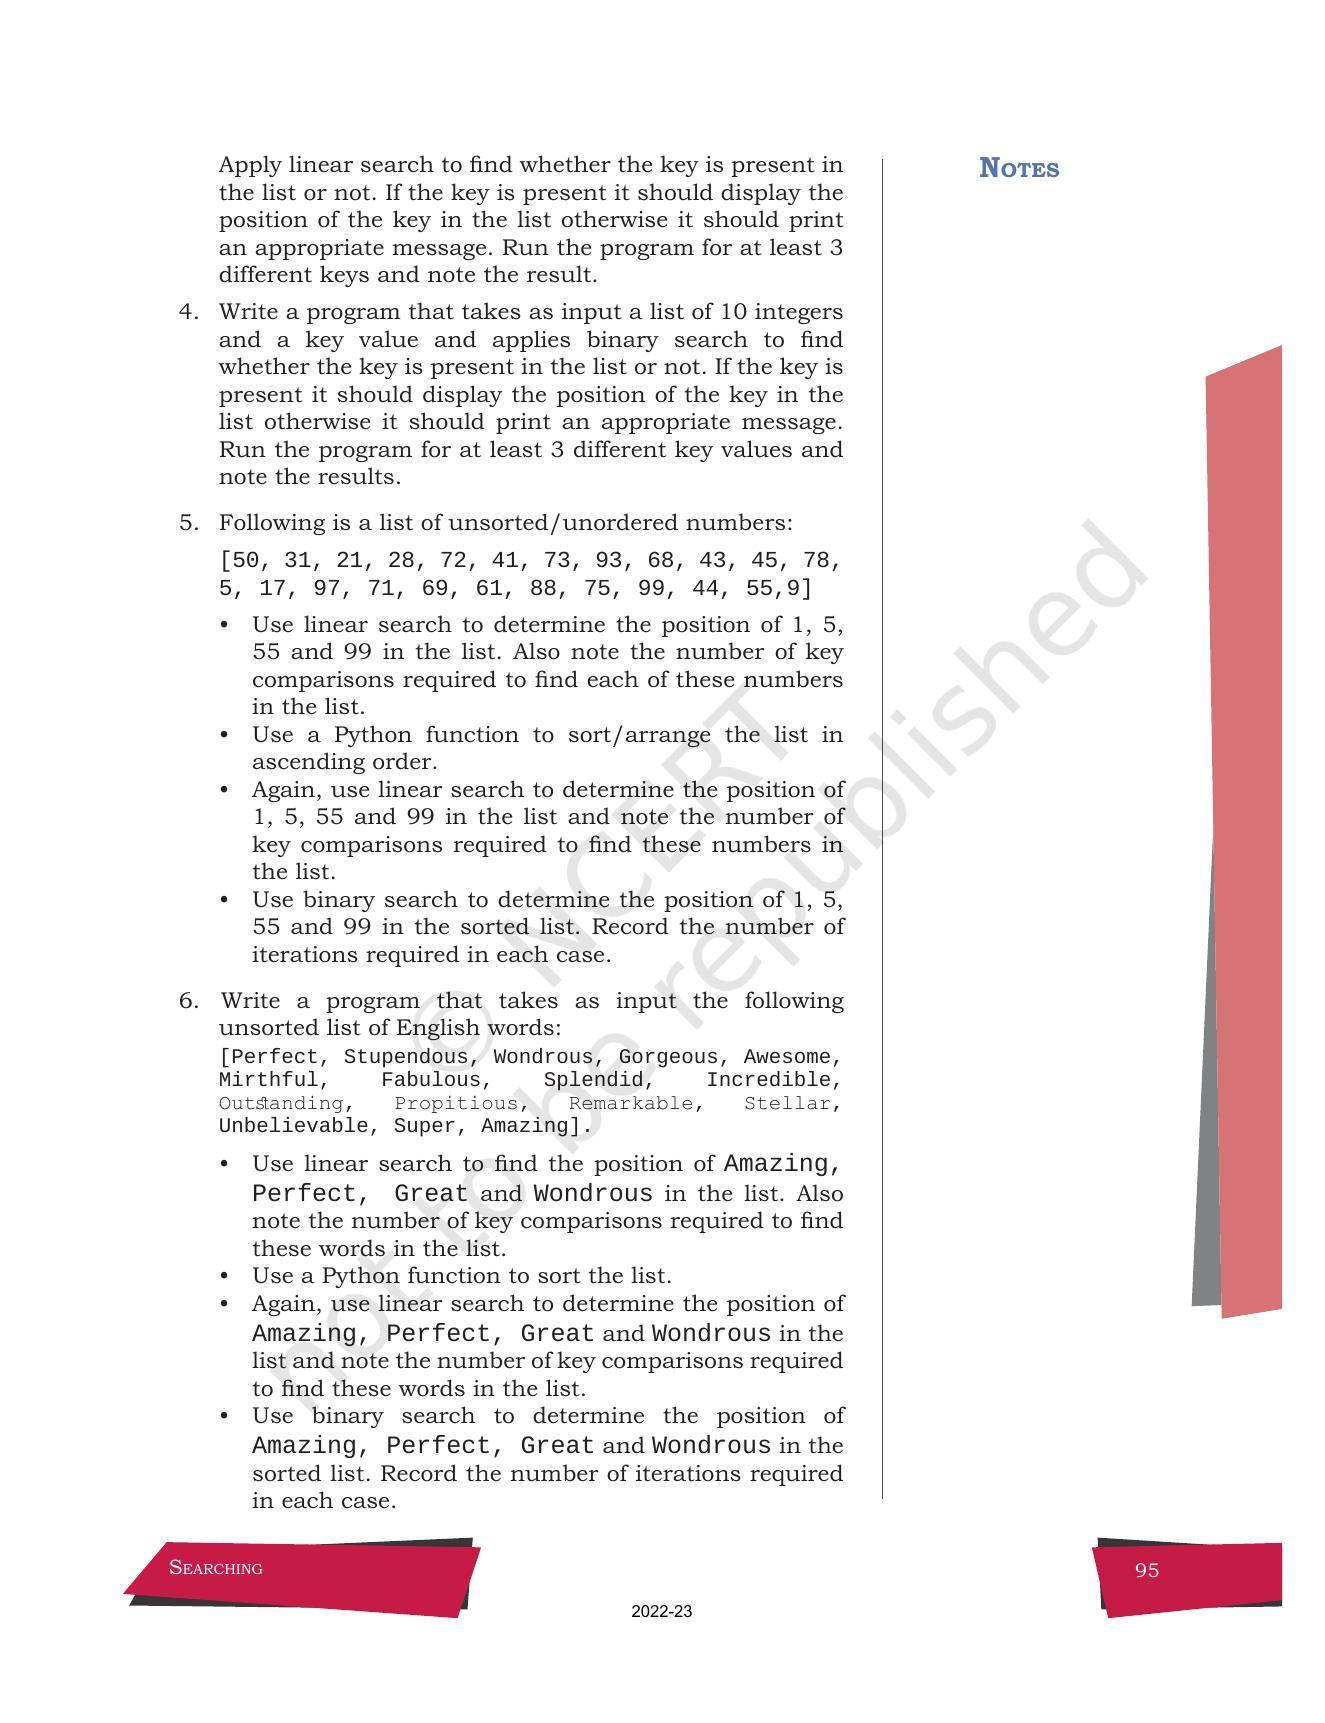 NCERT Book for Class 12 Computer Science Chapter 6 Searching - Page 15